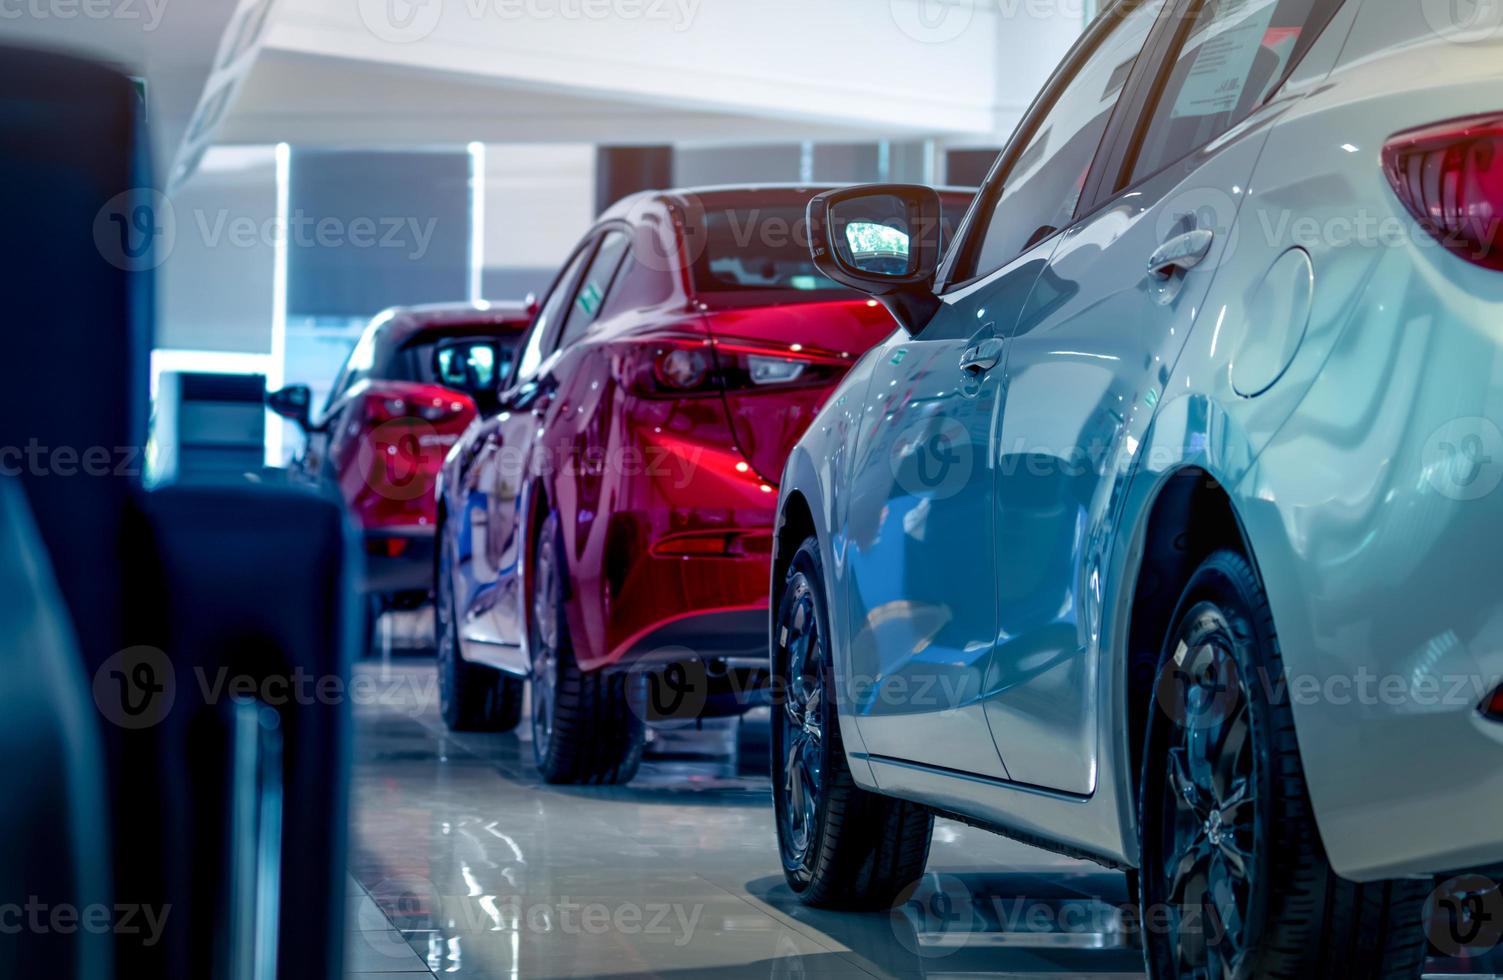 Rear view of new luxury red and white car parked in modern show room. Selective focus on white shiny car. Car dealership concept. Showroom interior. Automotive industry on coronavirus crisis concept. photo